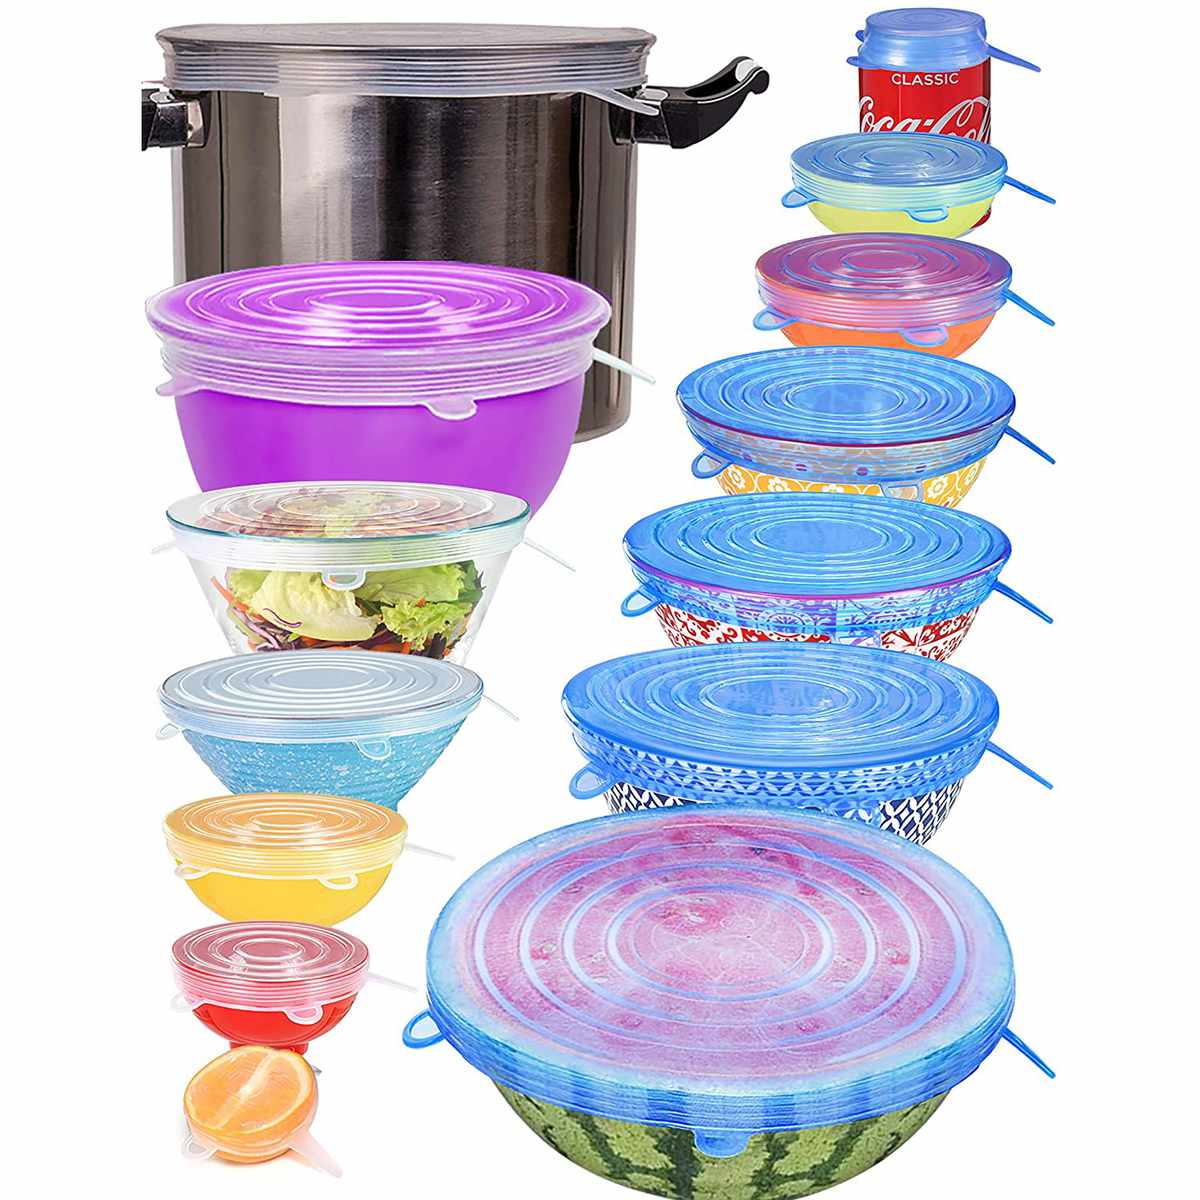 Details about   1-6 Stretch Reusable Silicone Bowl Food Storage Wrap Cover Seal Fresh Lids Film 